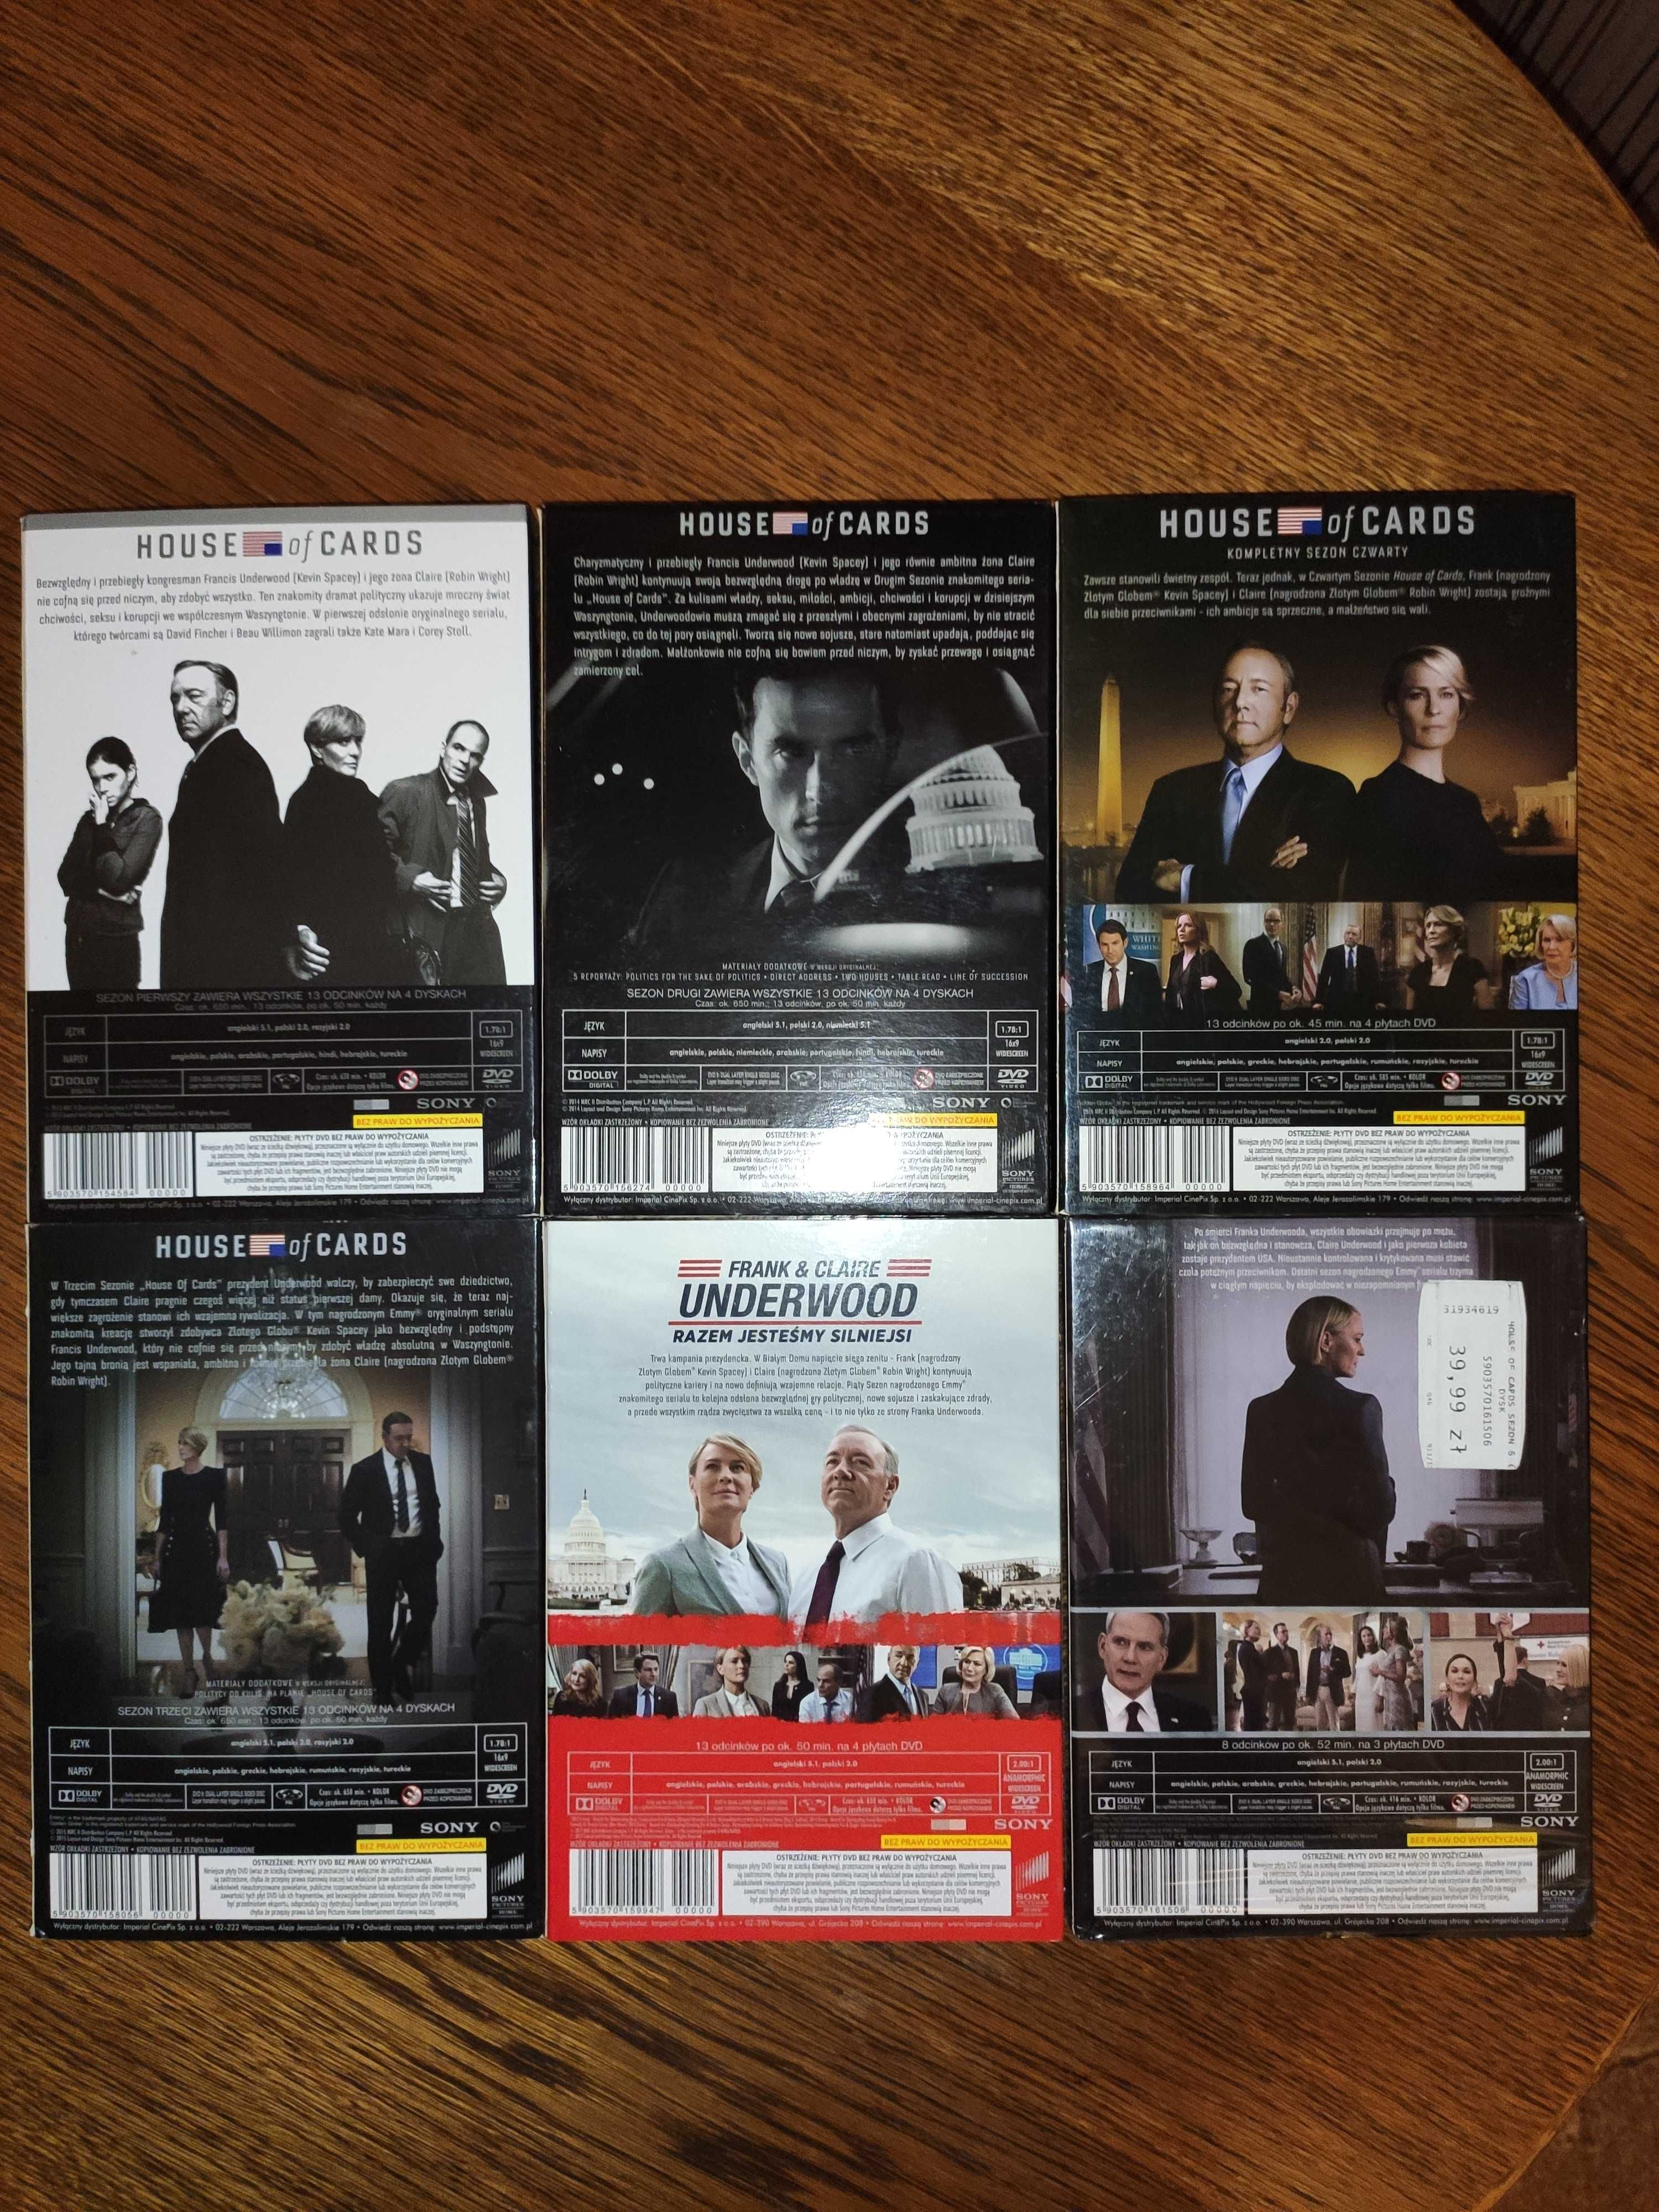 House of cards, sezon 1-6, 23DVD, PL, Spacey